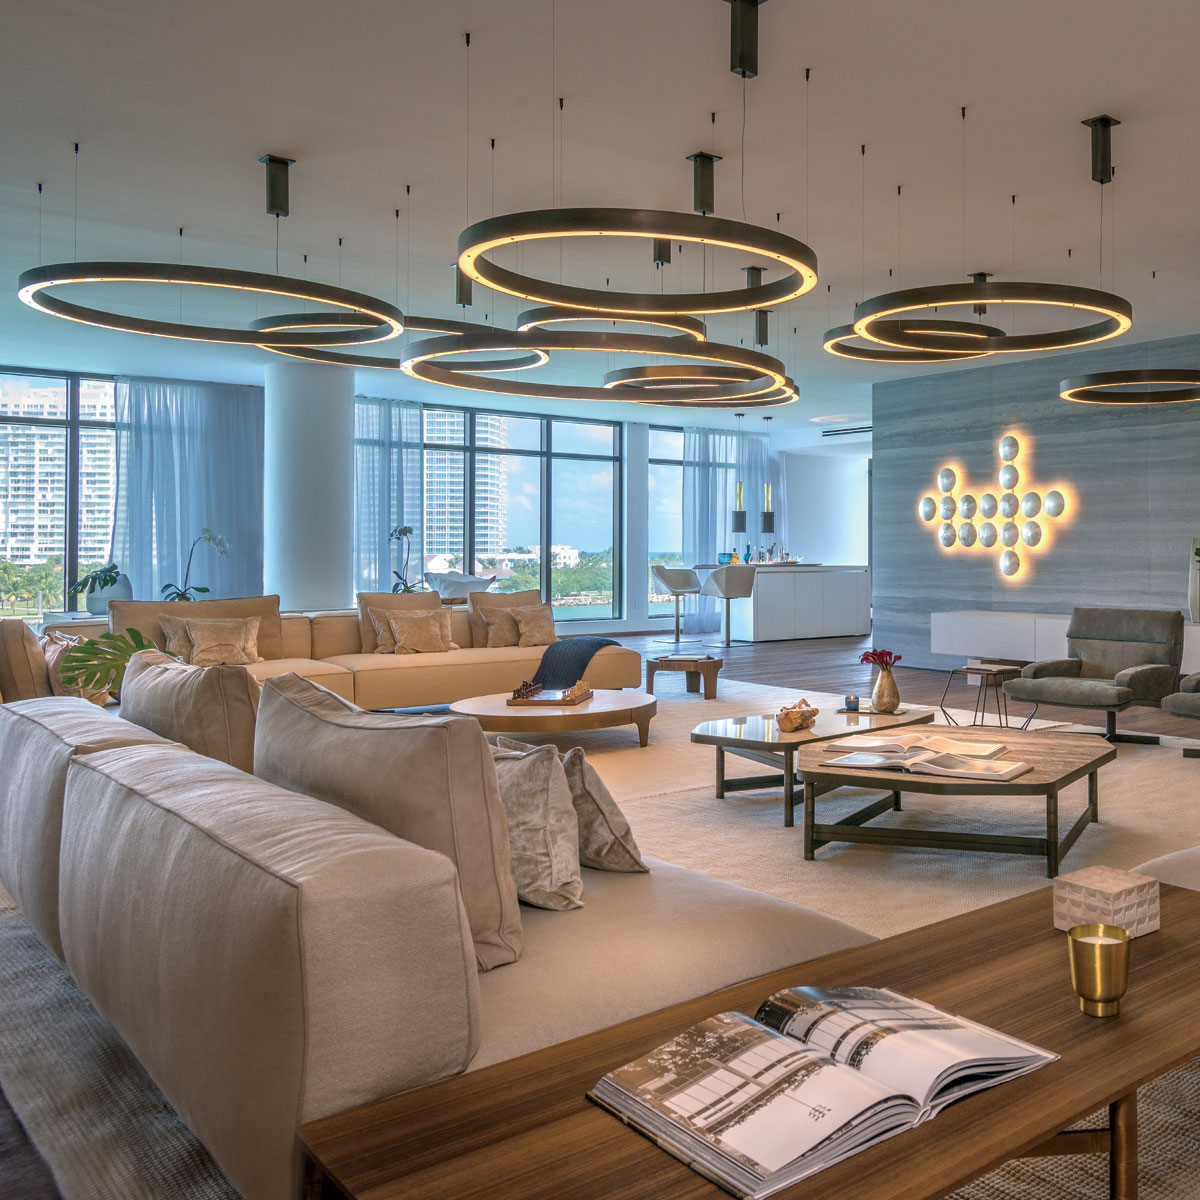 Miami Interior Designers on How They Interpret the Meaning of High Style